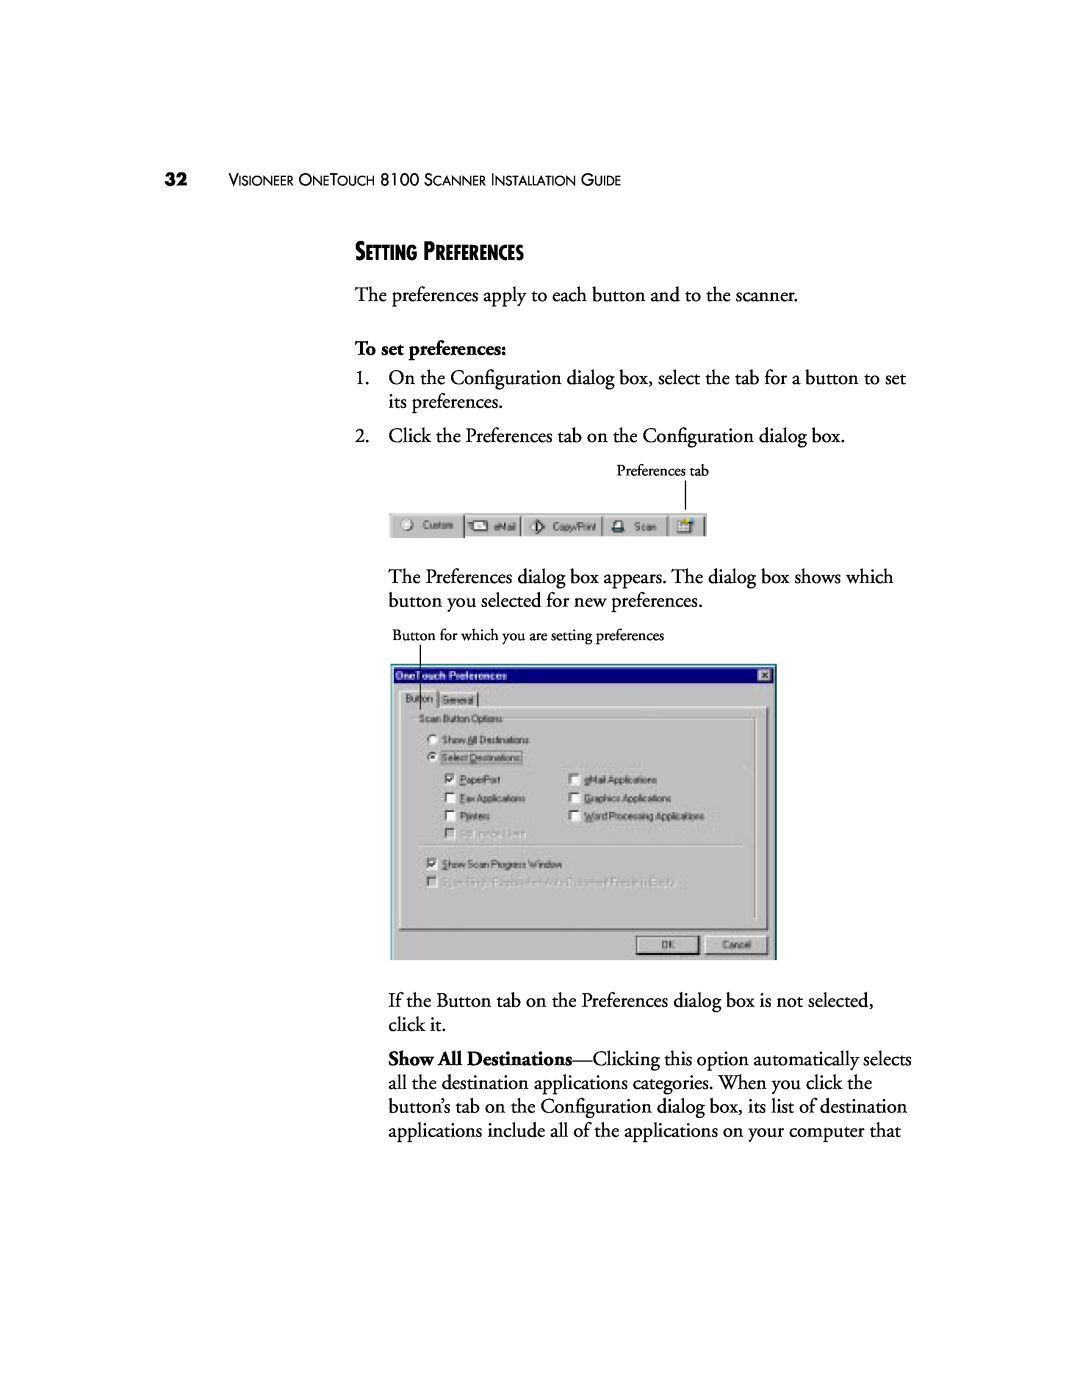 Visioneer 8100 manual Setting Preferences, To set preferences 